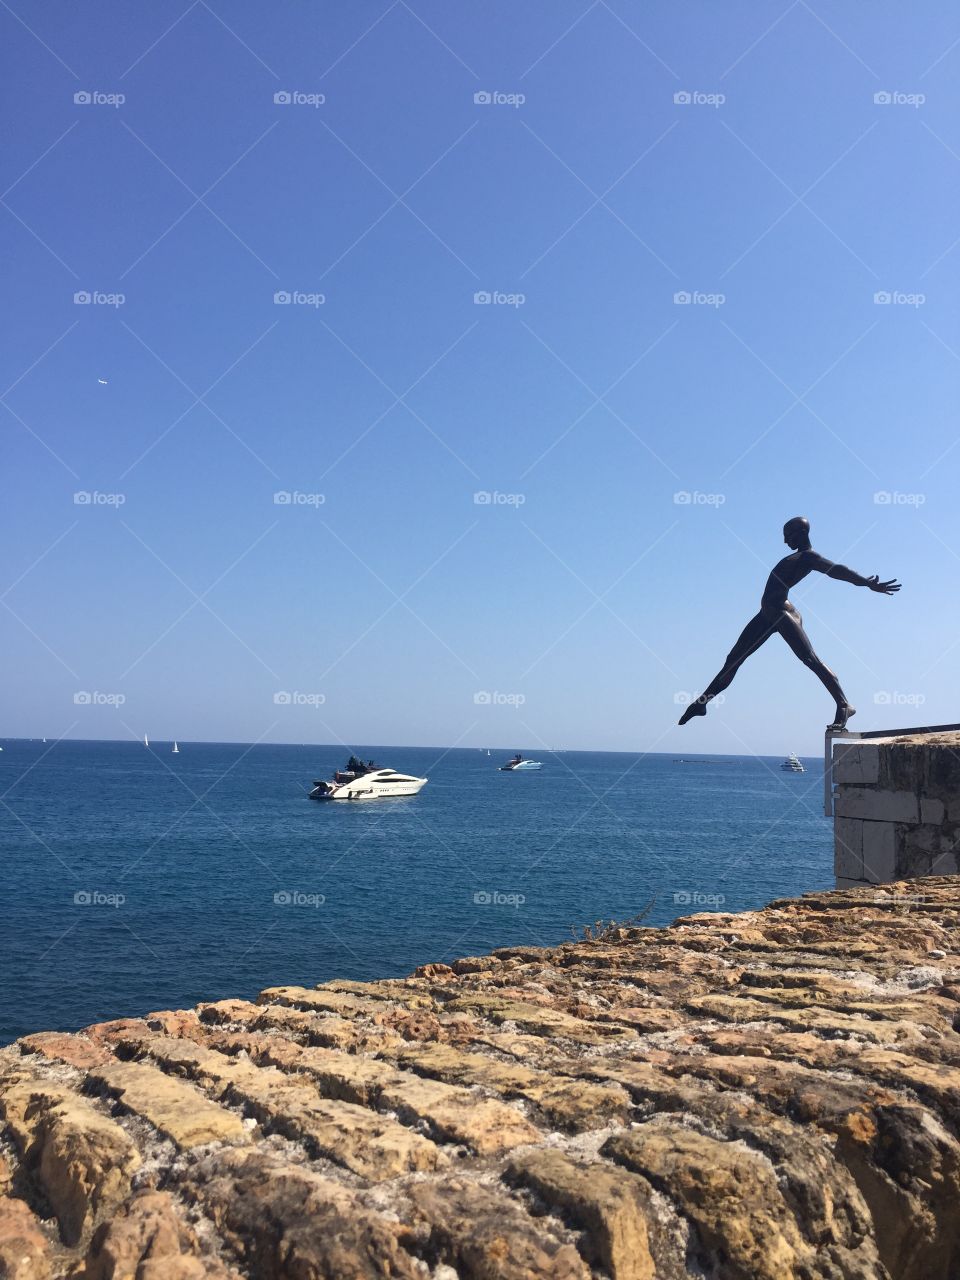 Taking a leap of faith. Coastal art in the French Riviera. 